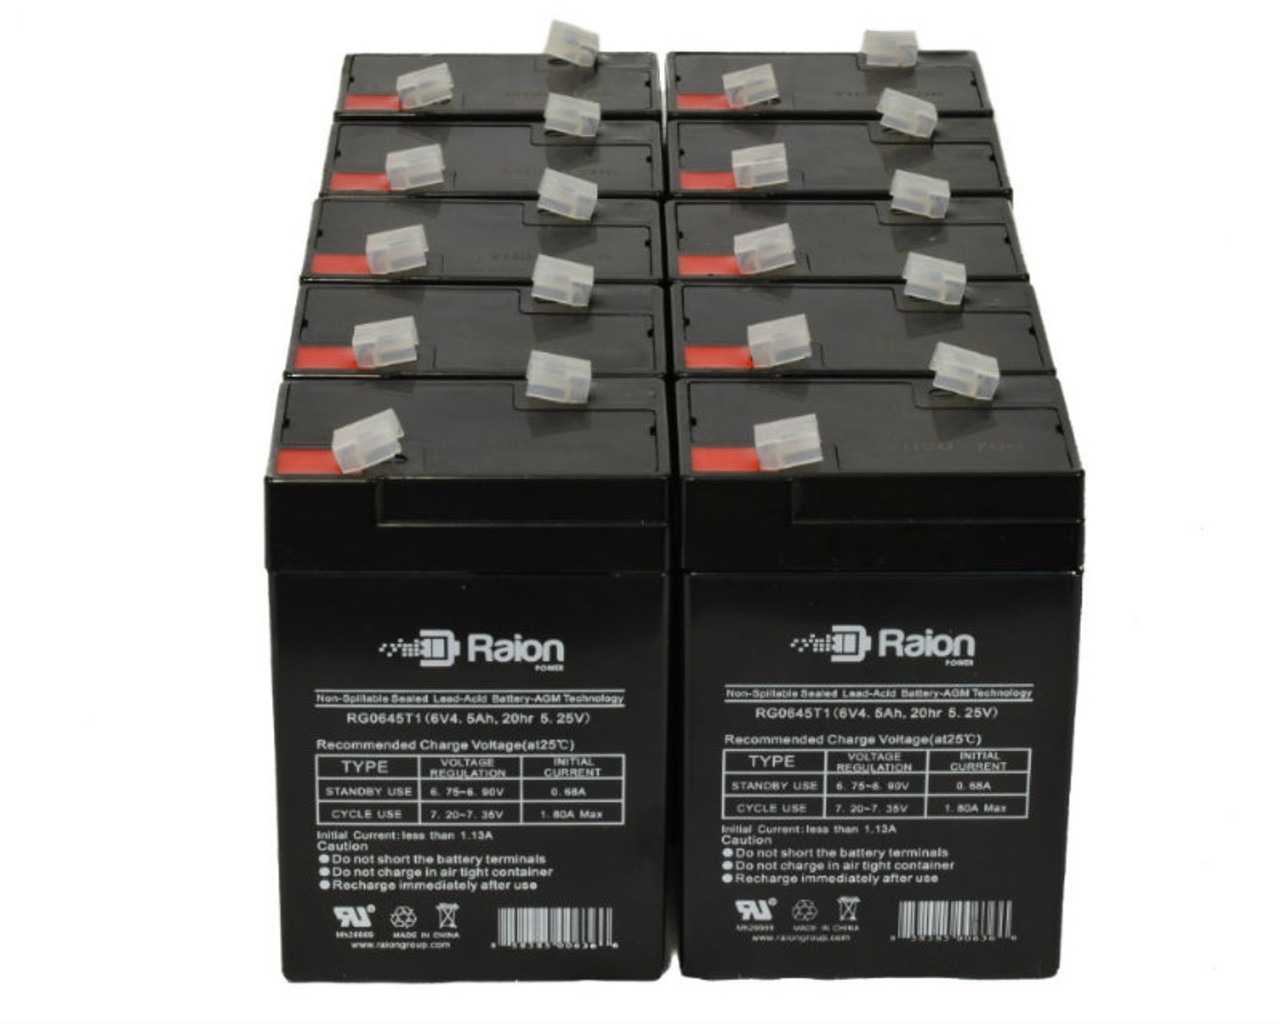 Raion Power 6V 4.5Ah Replacement Emergency Light Battery for Light Alarms 5E15AA - 10 Pack